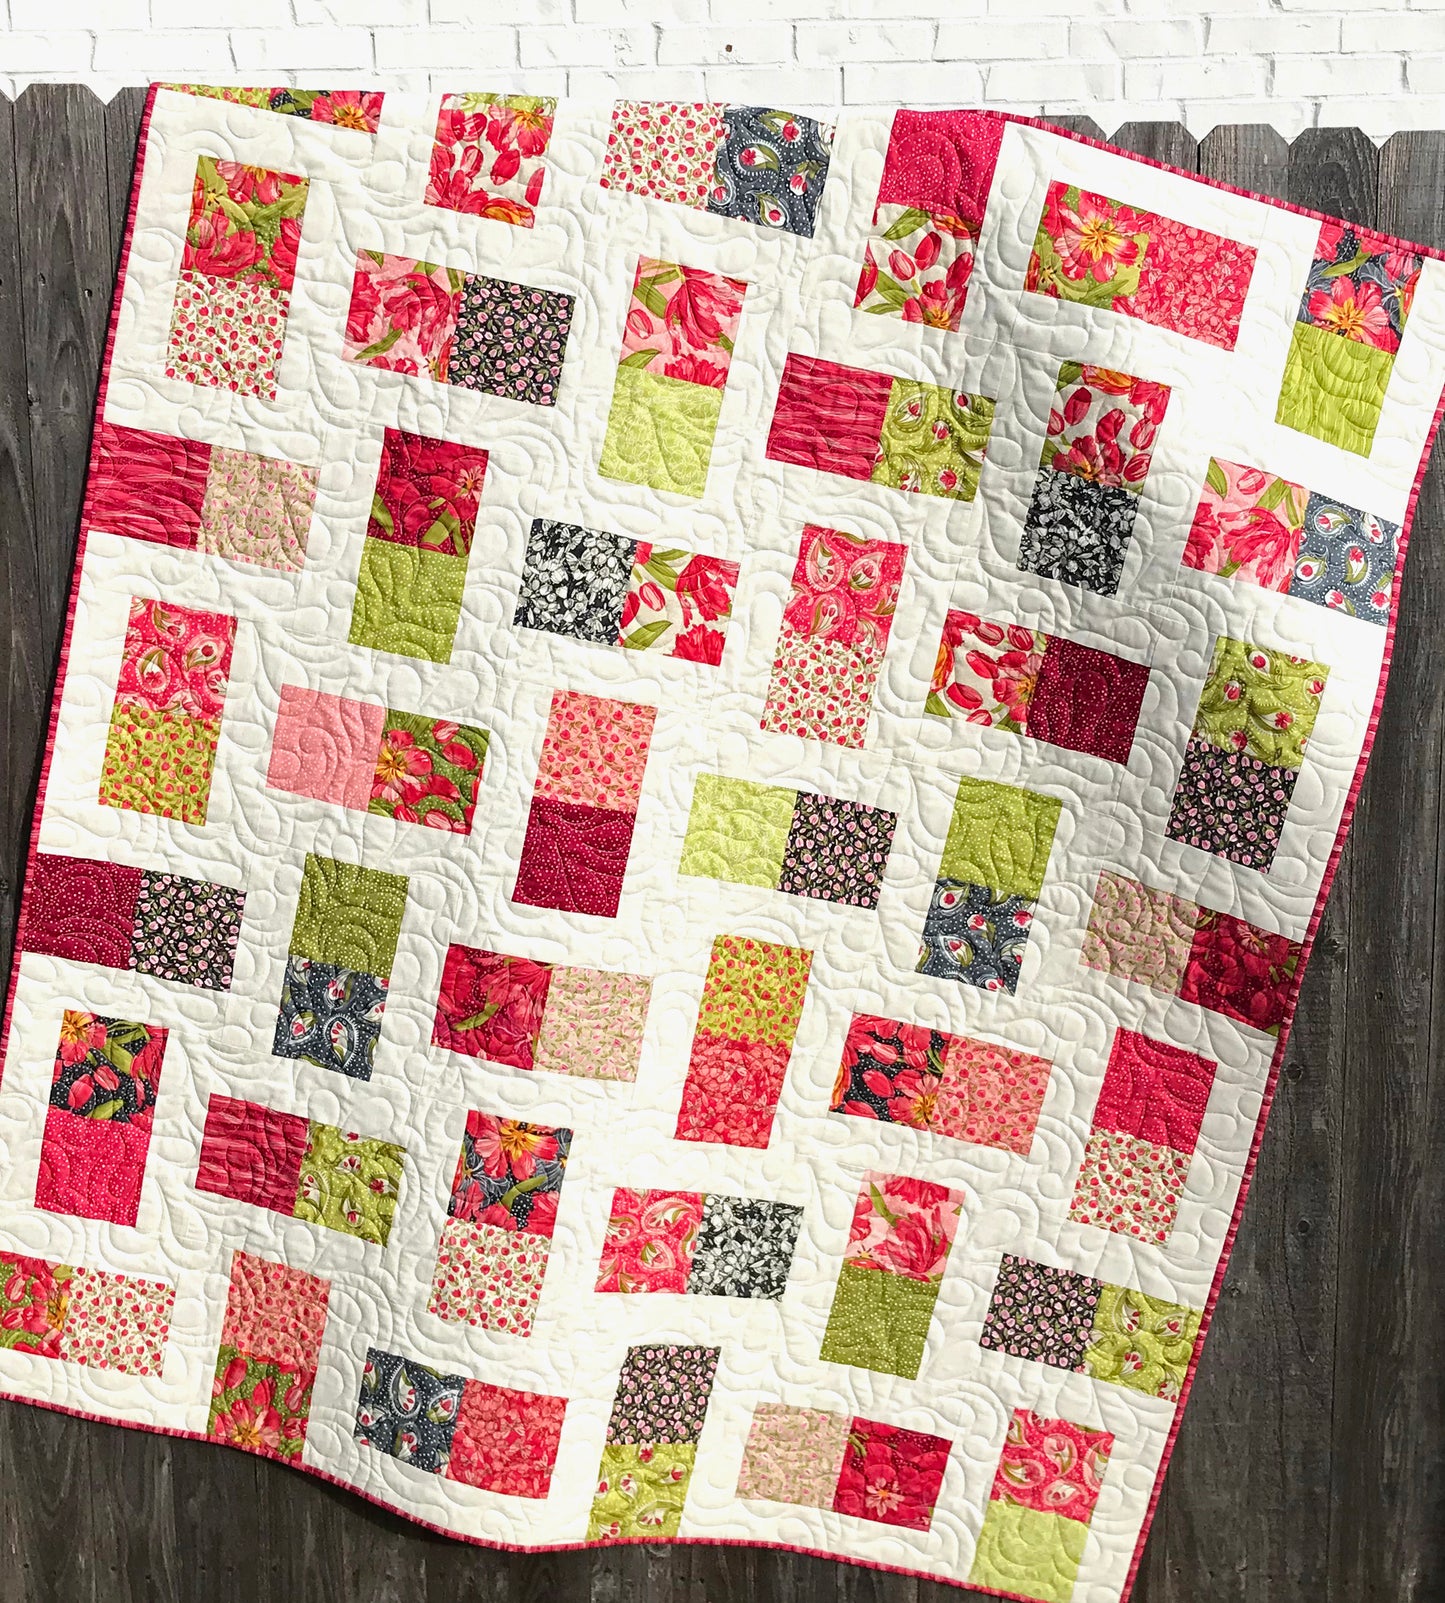 Quilts for Sale, Patchwork Quilt Handmade, Heirloom Quilt